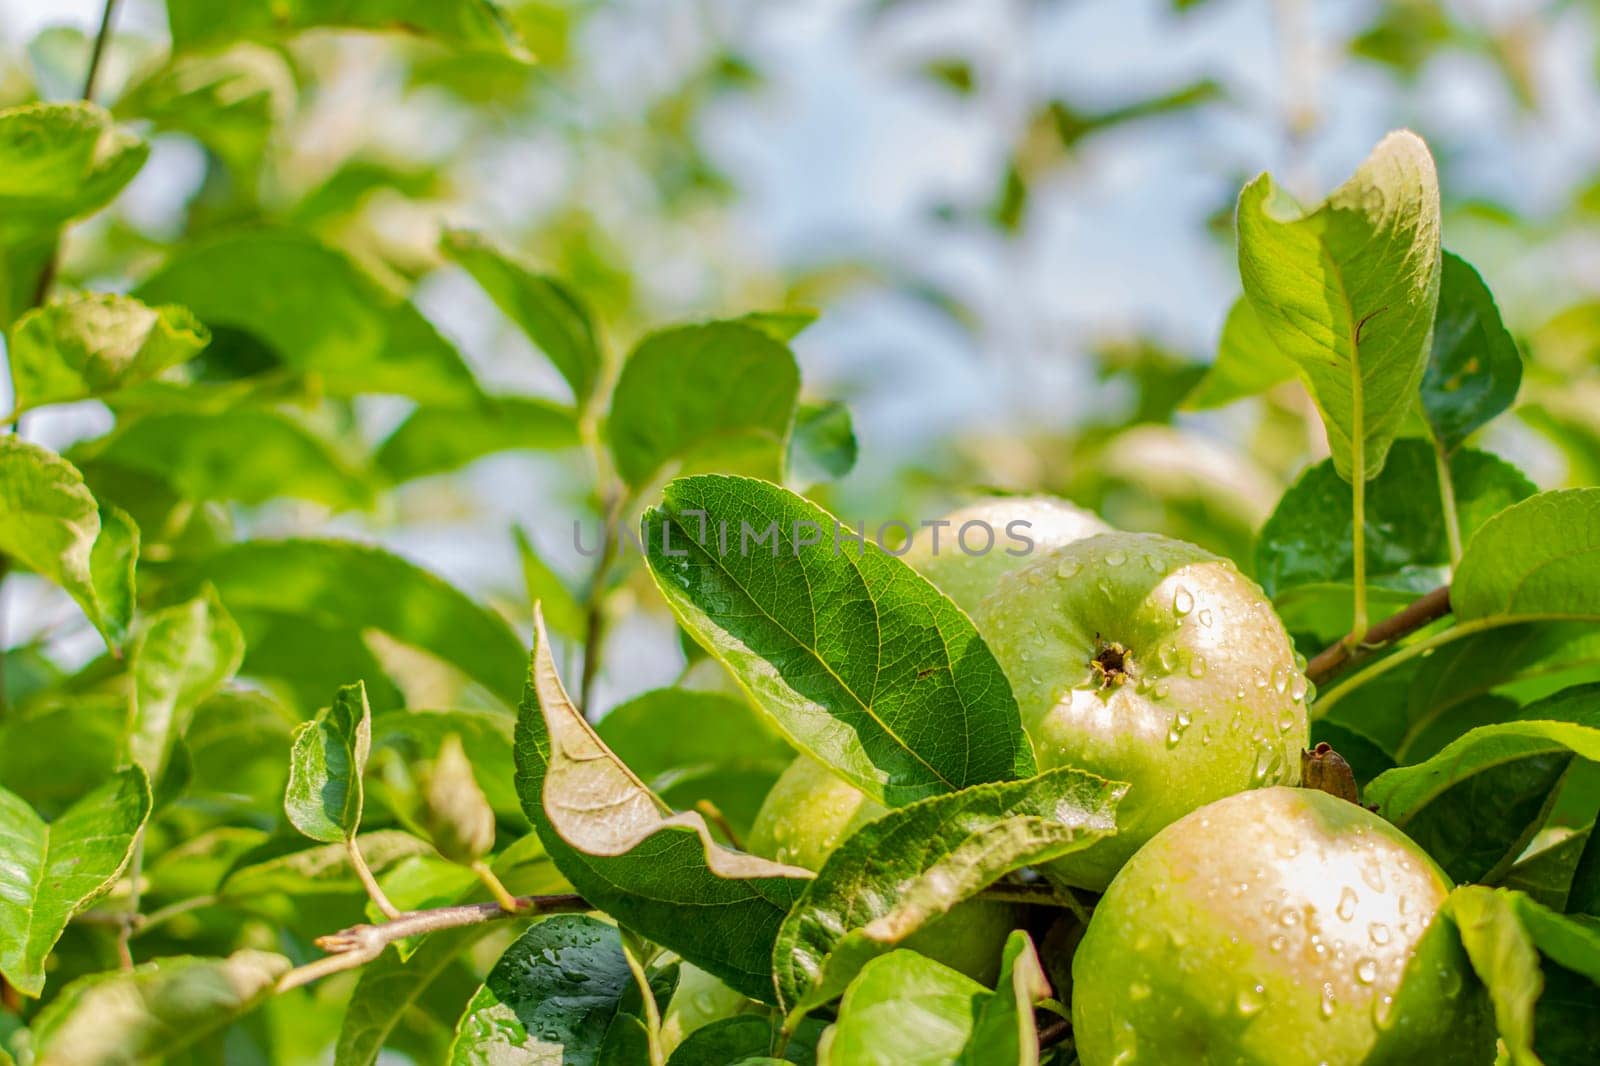 Ripe apples covered with raindrops on tree branches against the sky.